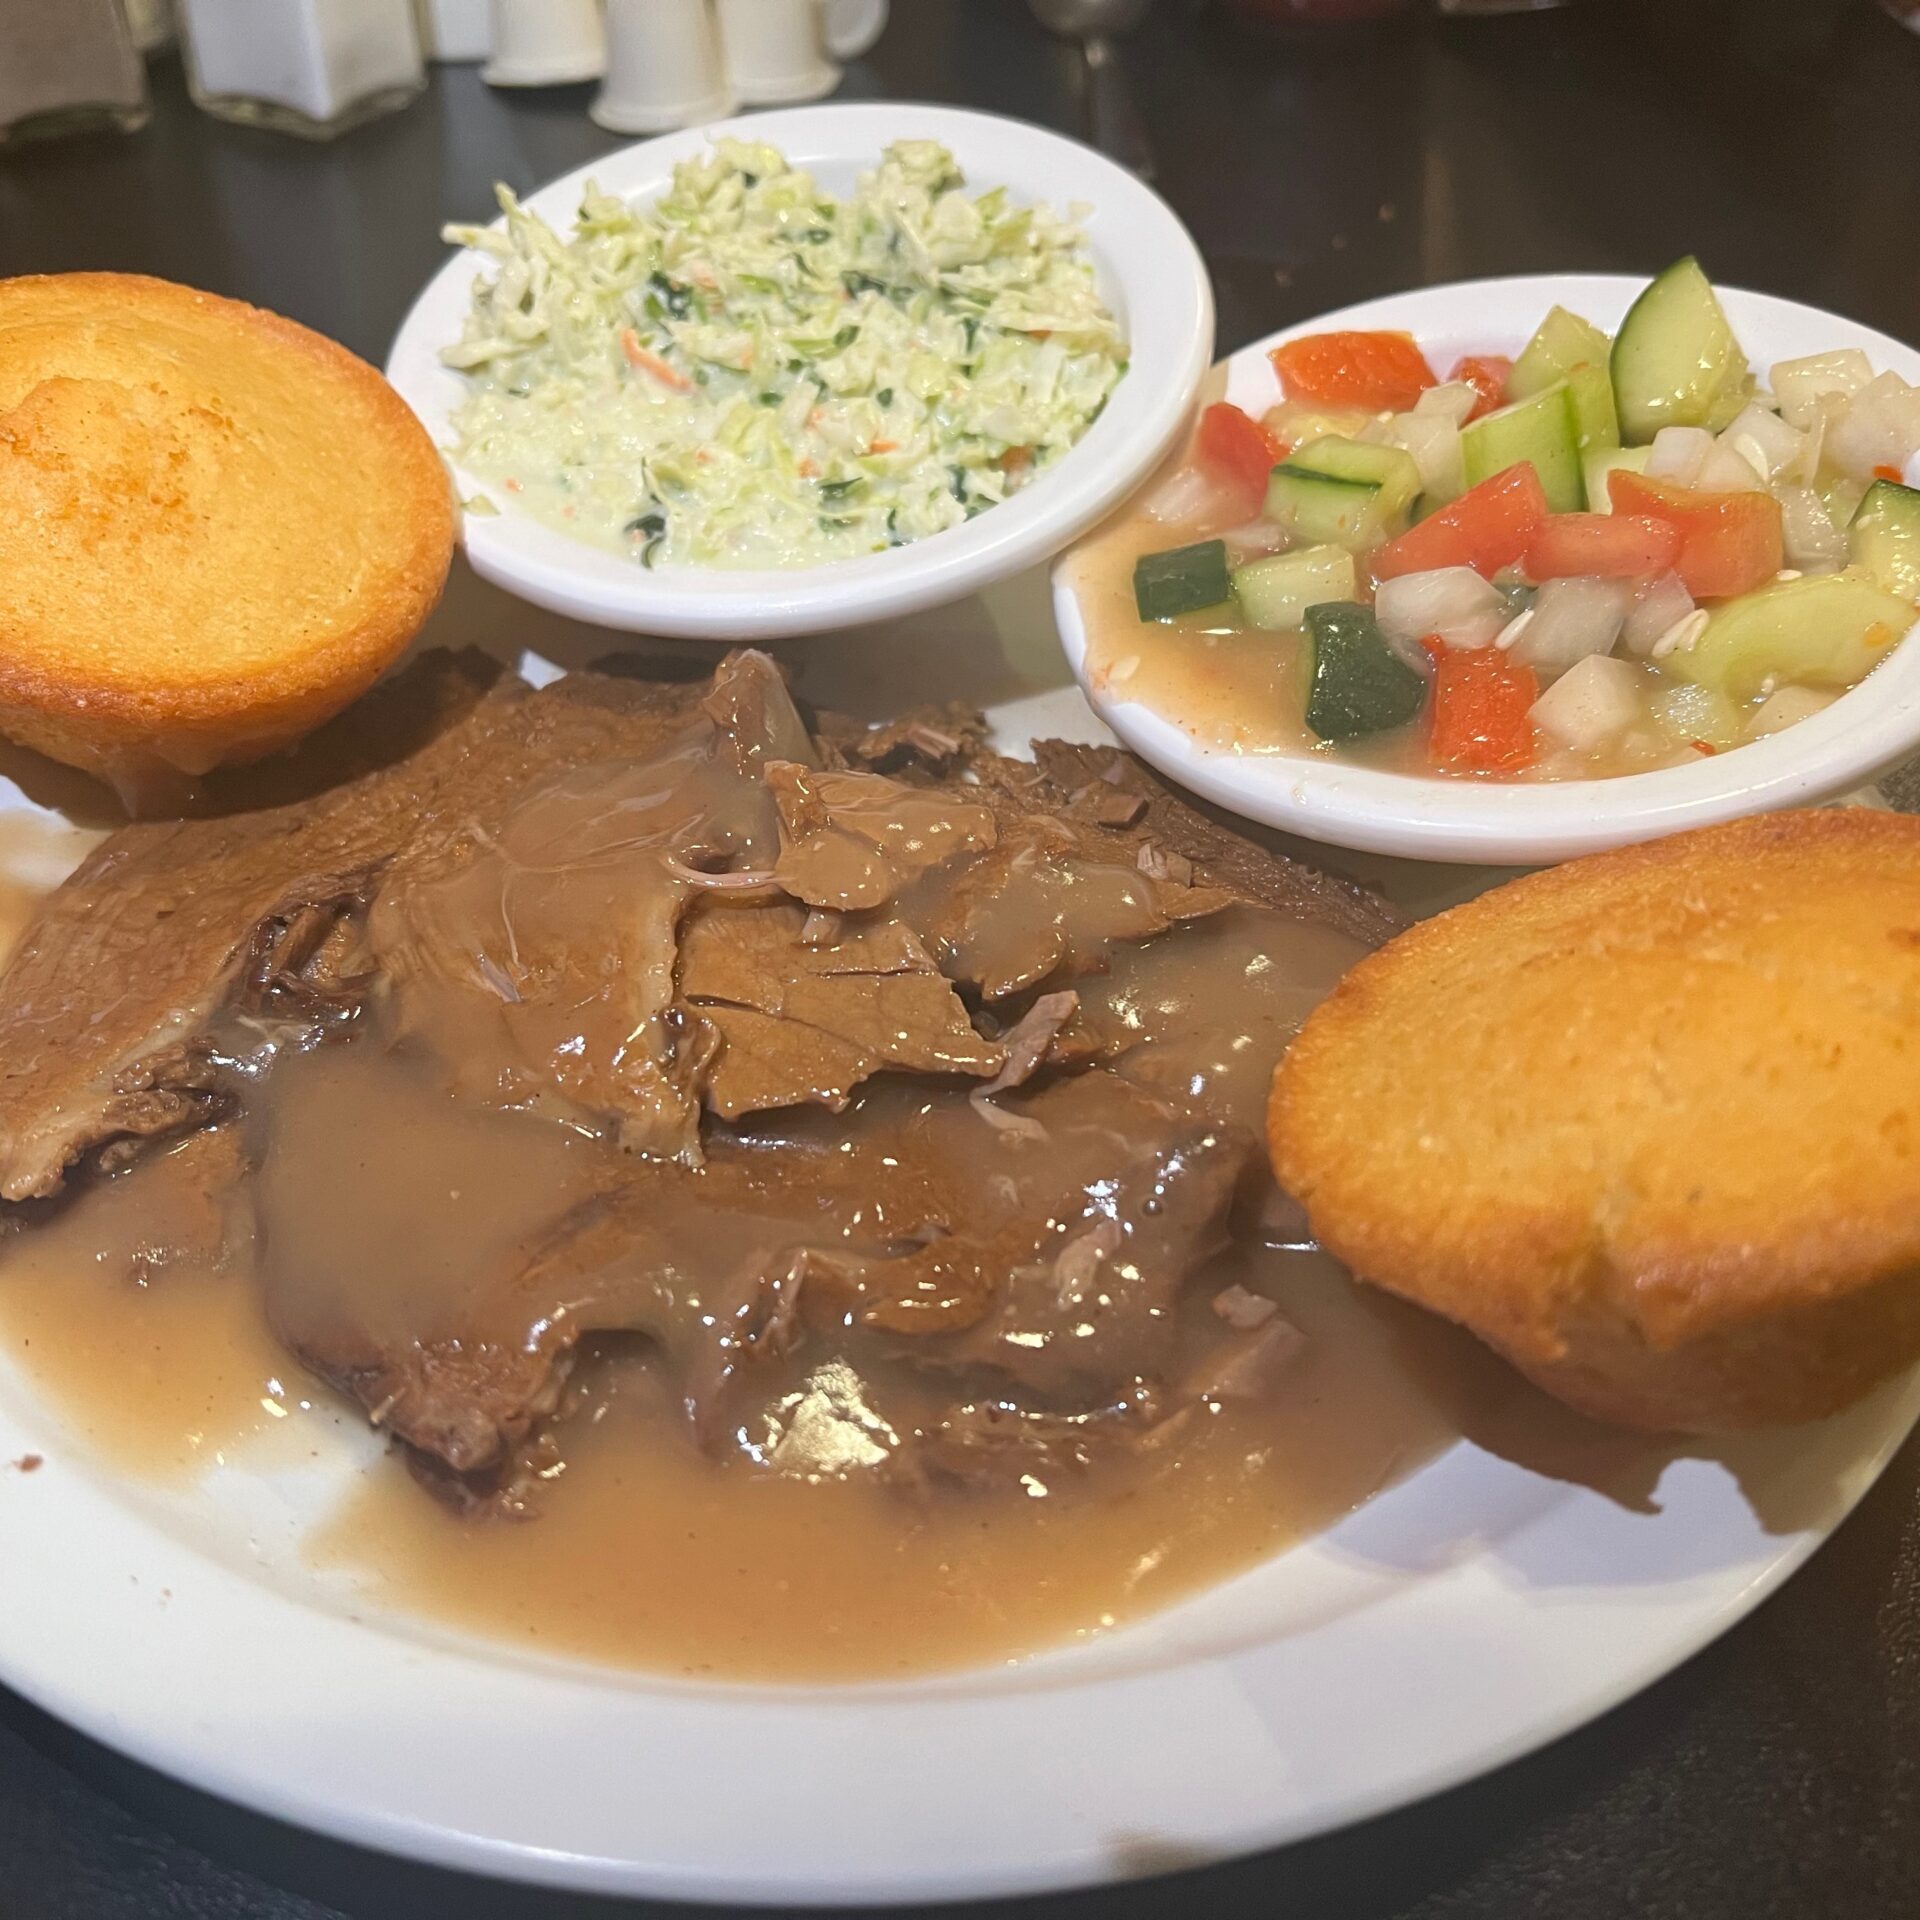 Roast-Beef-with-slaw-onion-cucumber-salad-and-corn-muffins-Brad-Blankenship-1-1315